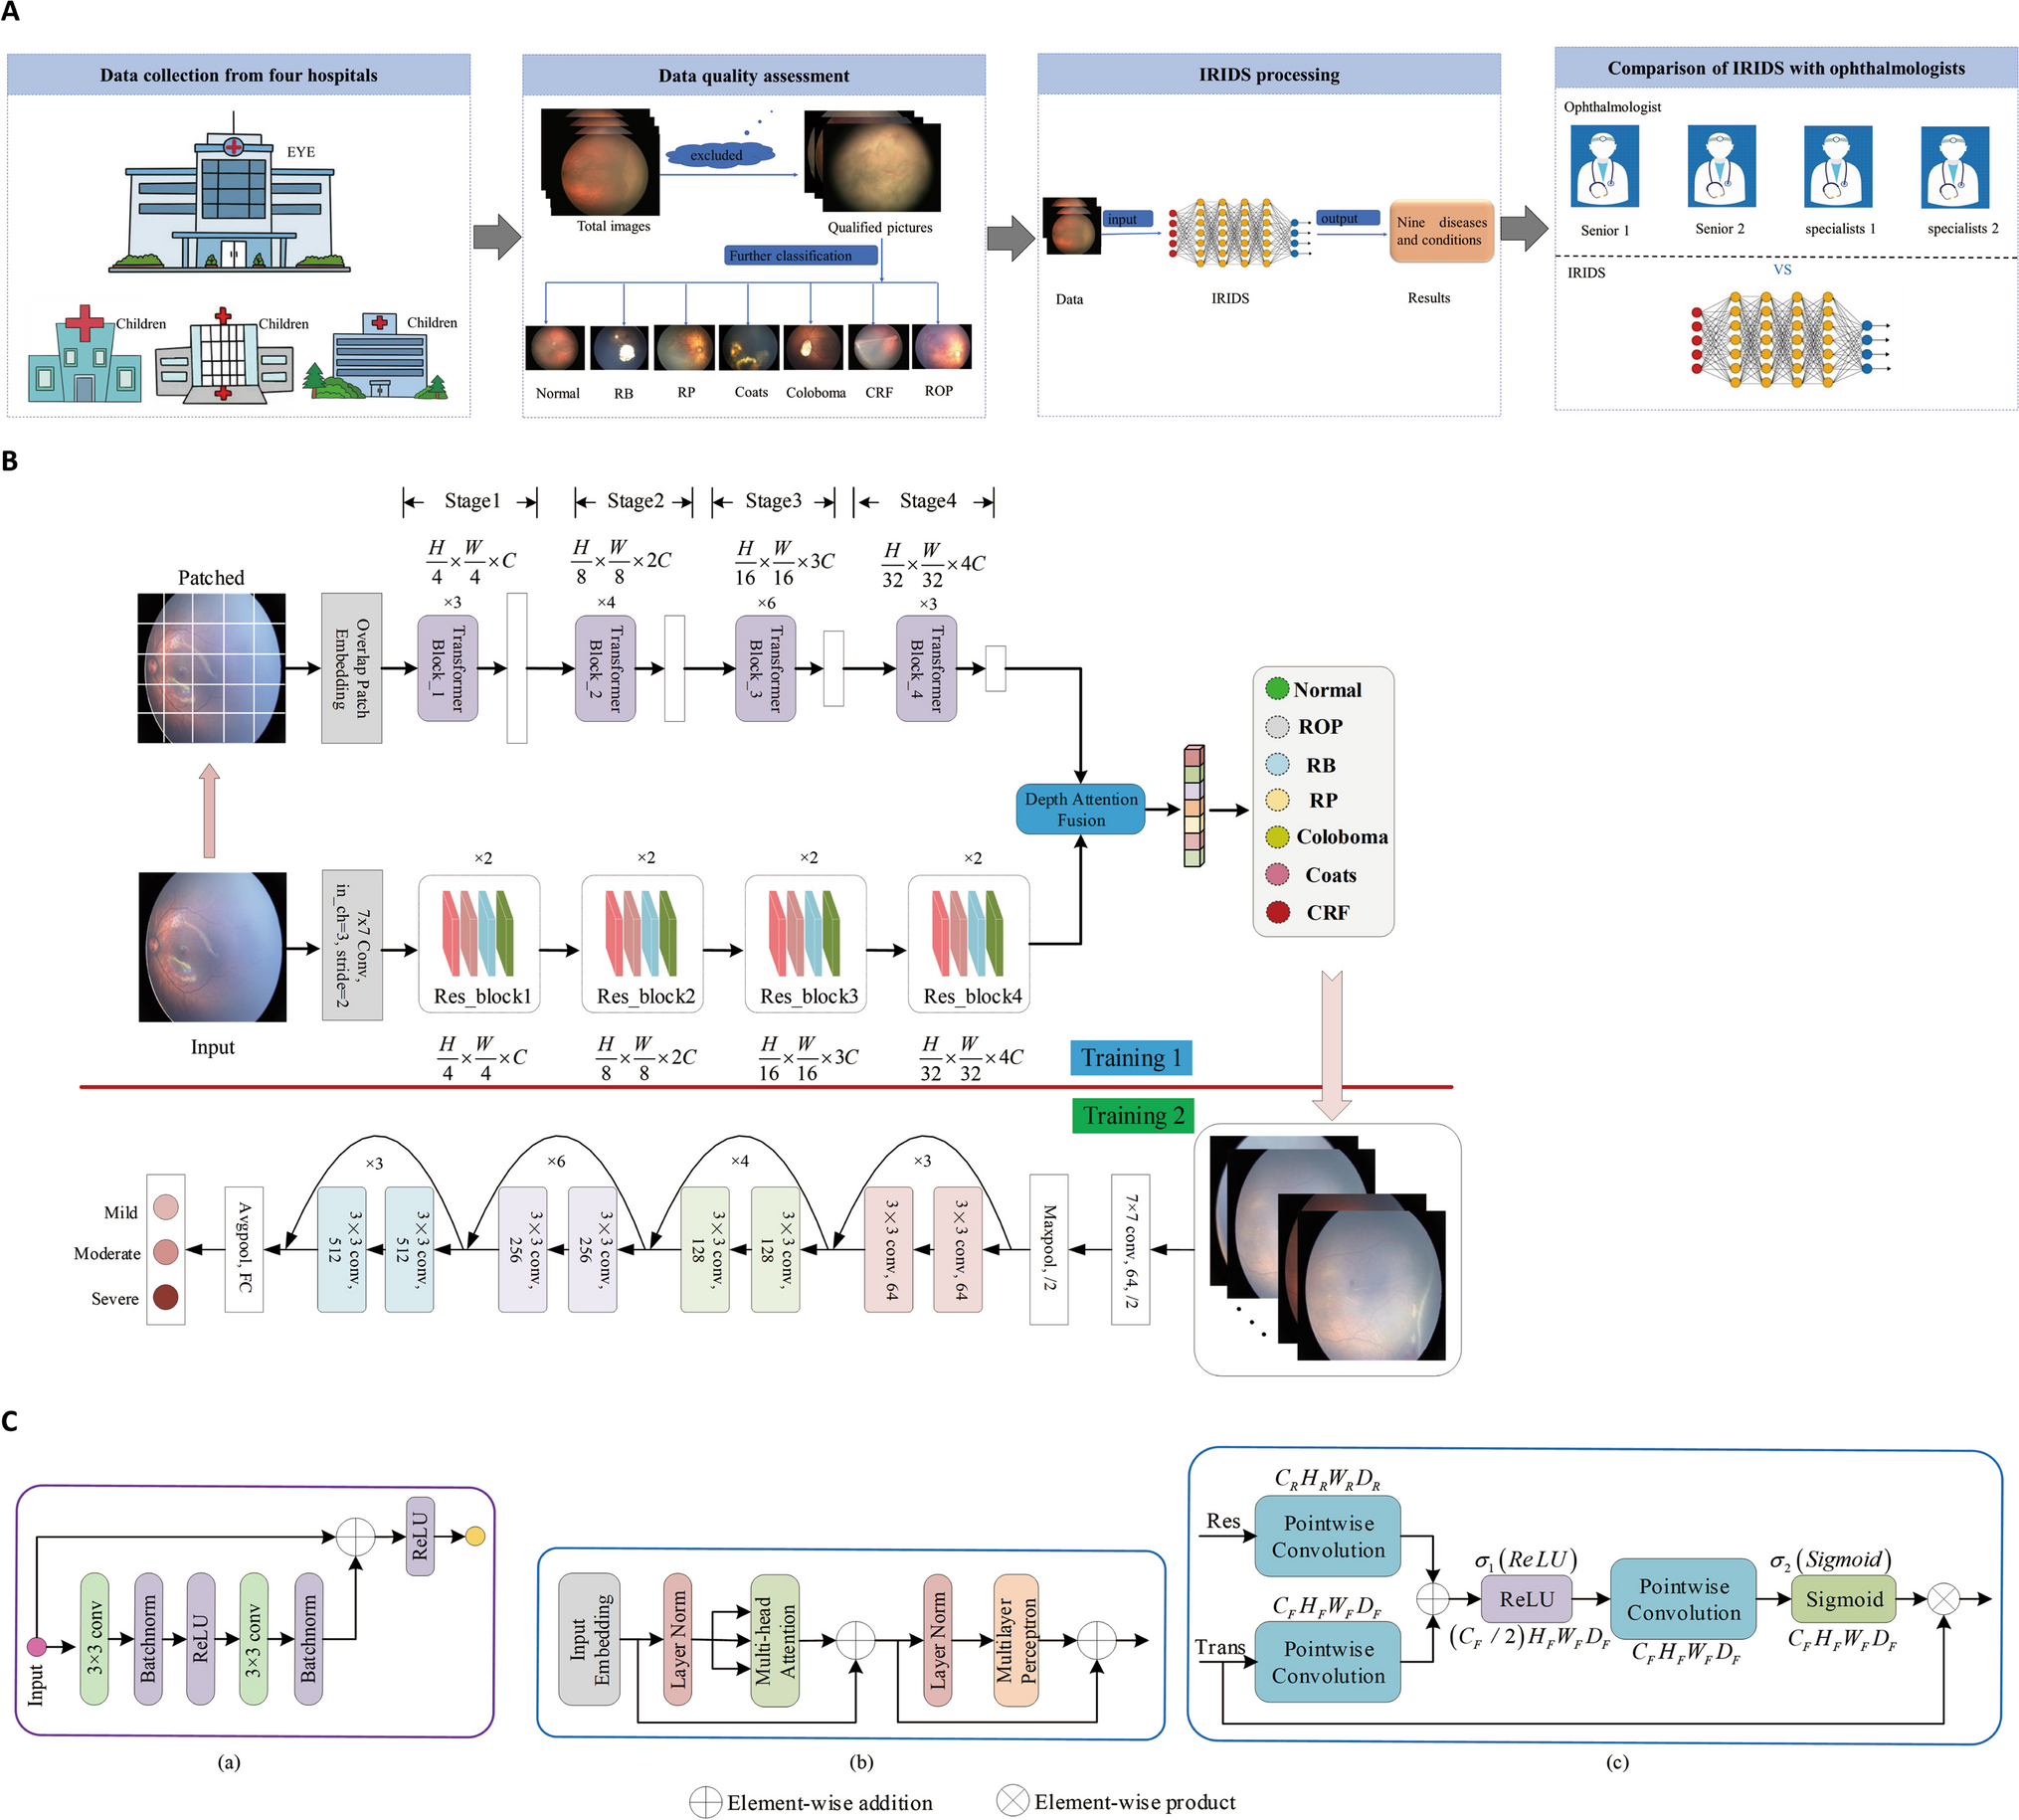 Automated detection of nine infantile fundus diseases and conditions in retinal images using a deep learning system